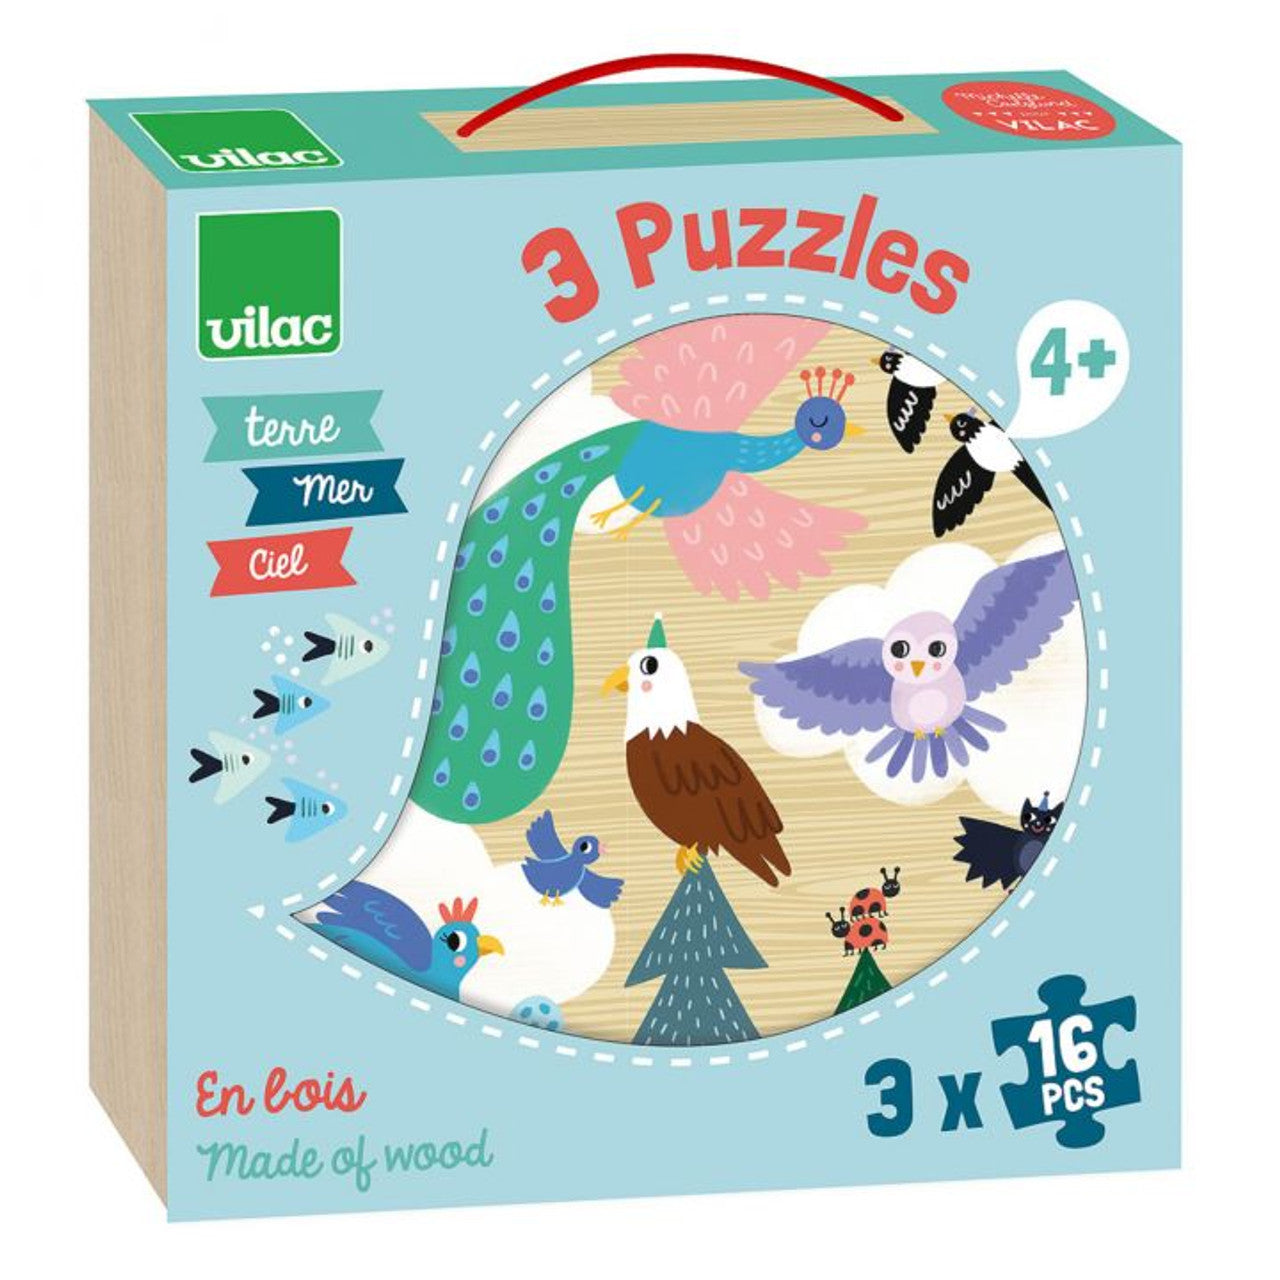 Djeco Puzzle Gallery Miss Birdy 350 piece – Two Kids and A Dog